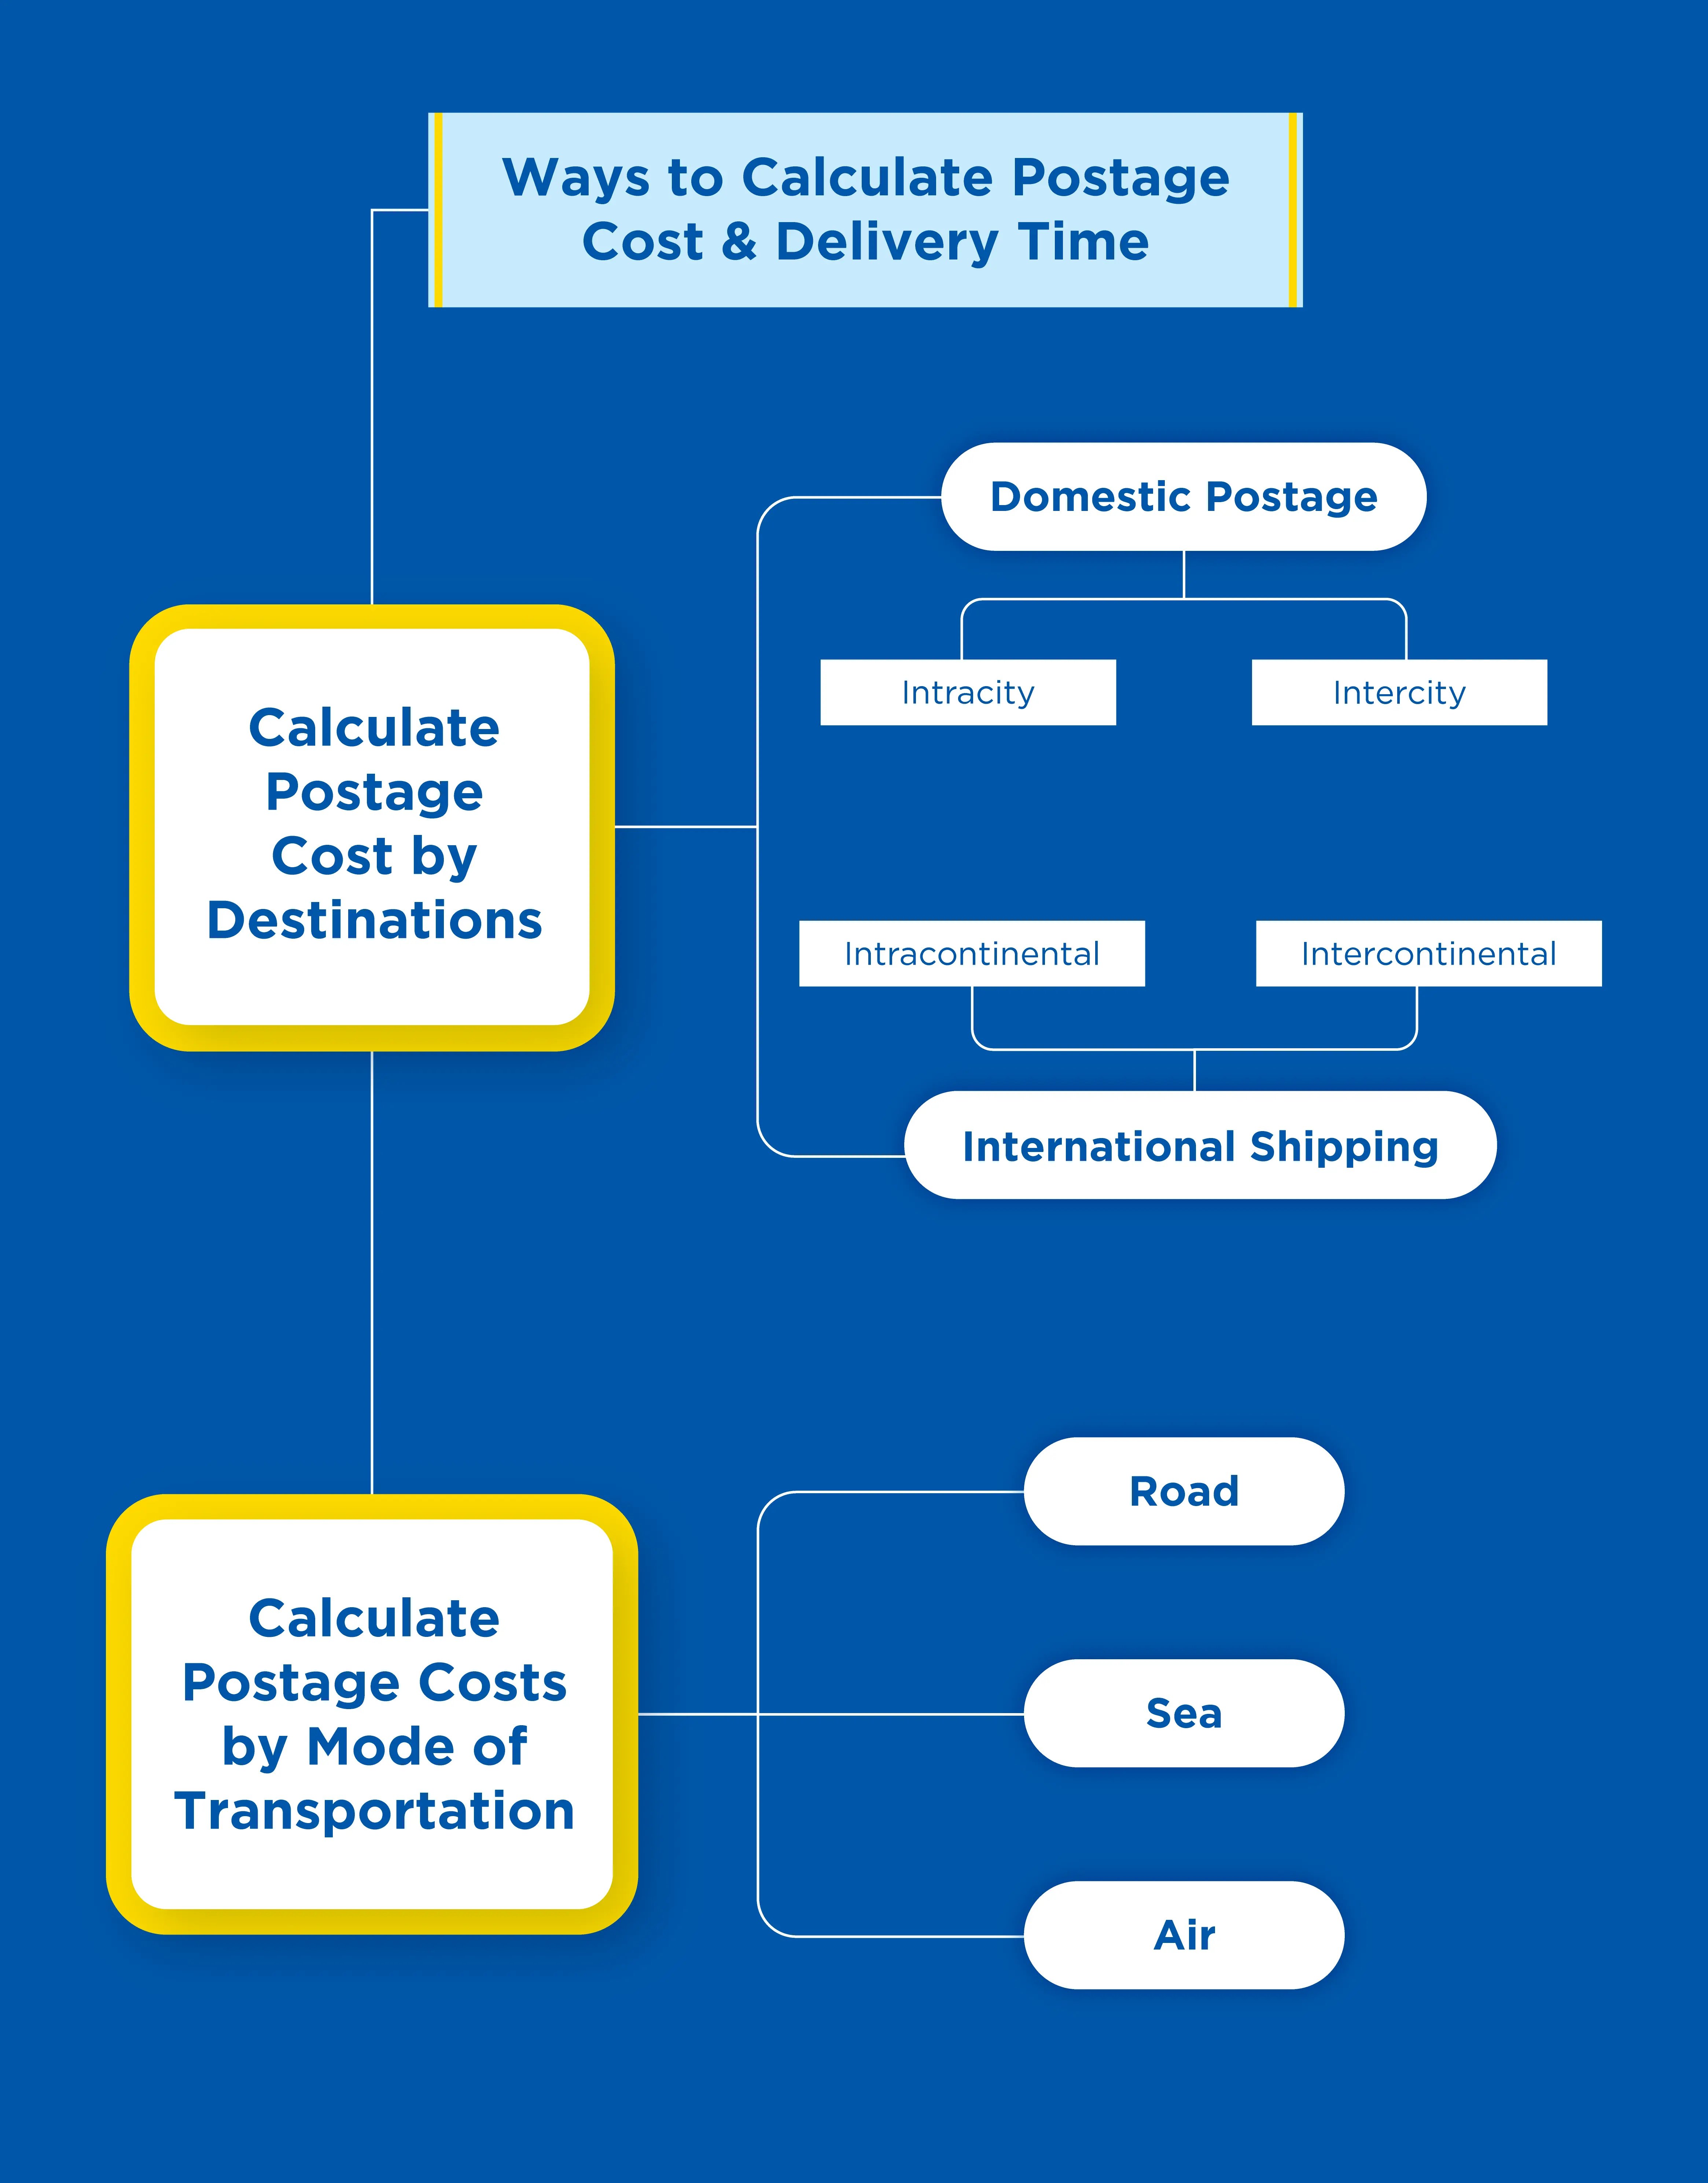 Ways-to-Calculate-Postage-Cost-and-Delivery-Time